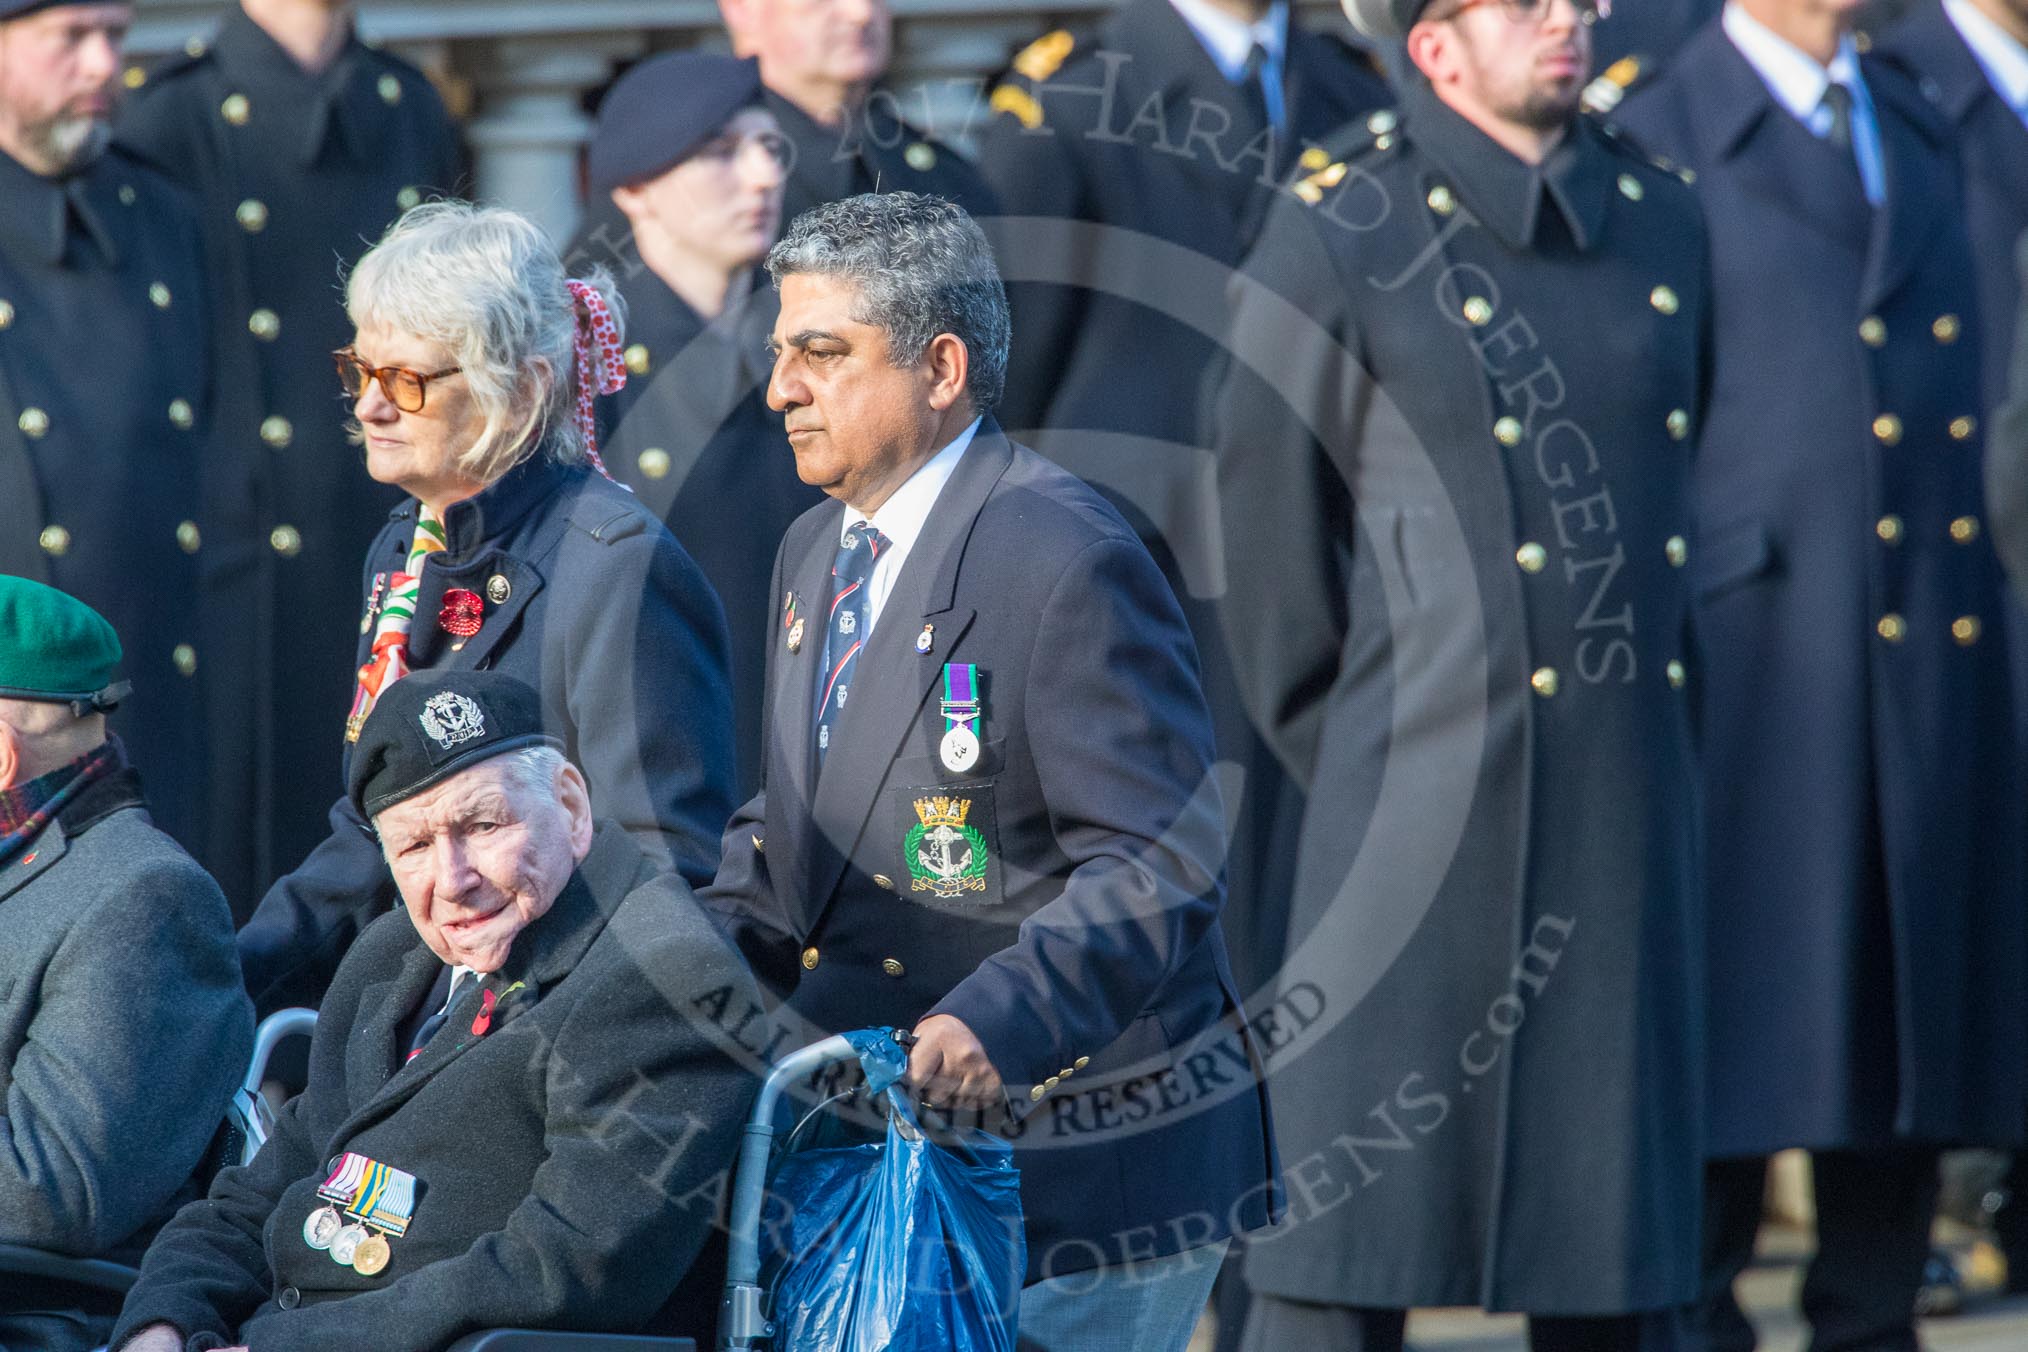 Royal Naval Association  (Group E1, 94 members) during the Royal British Legion March Past on Remembrance Sunday at the Cenotaph, Whitehall, Westminster, London, 11 November 2018, 11:41.